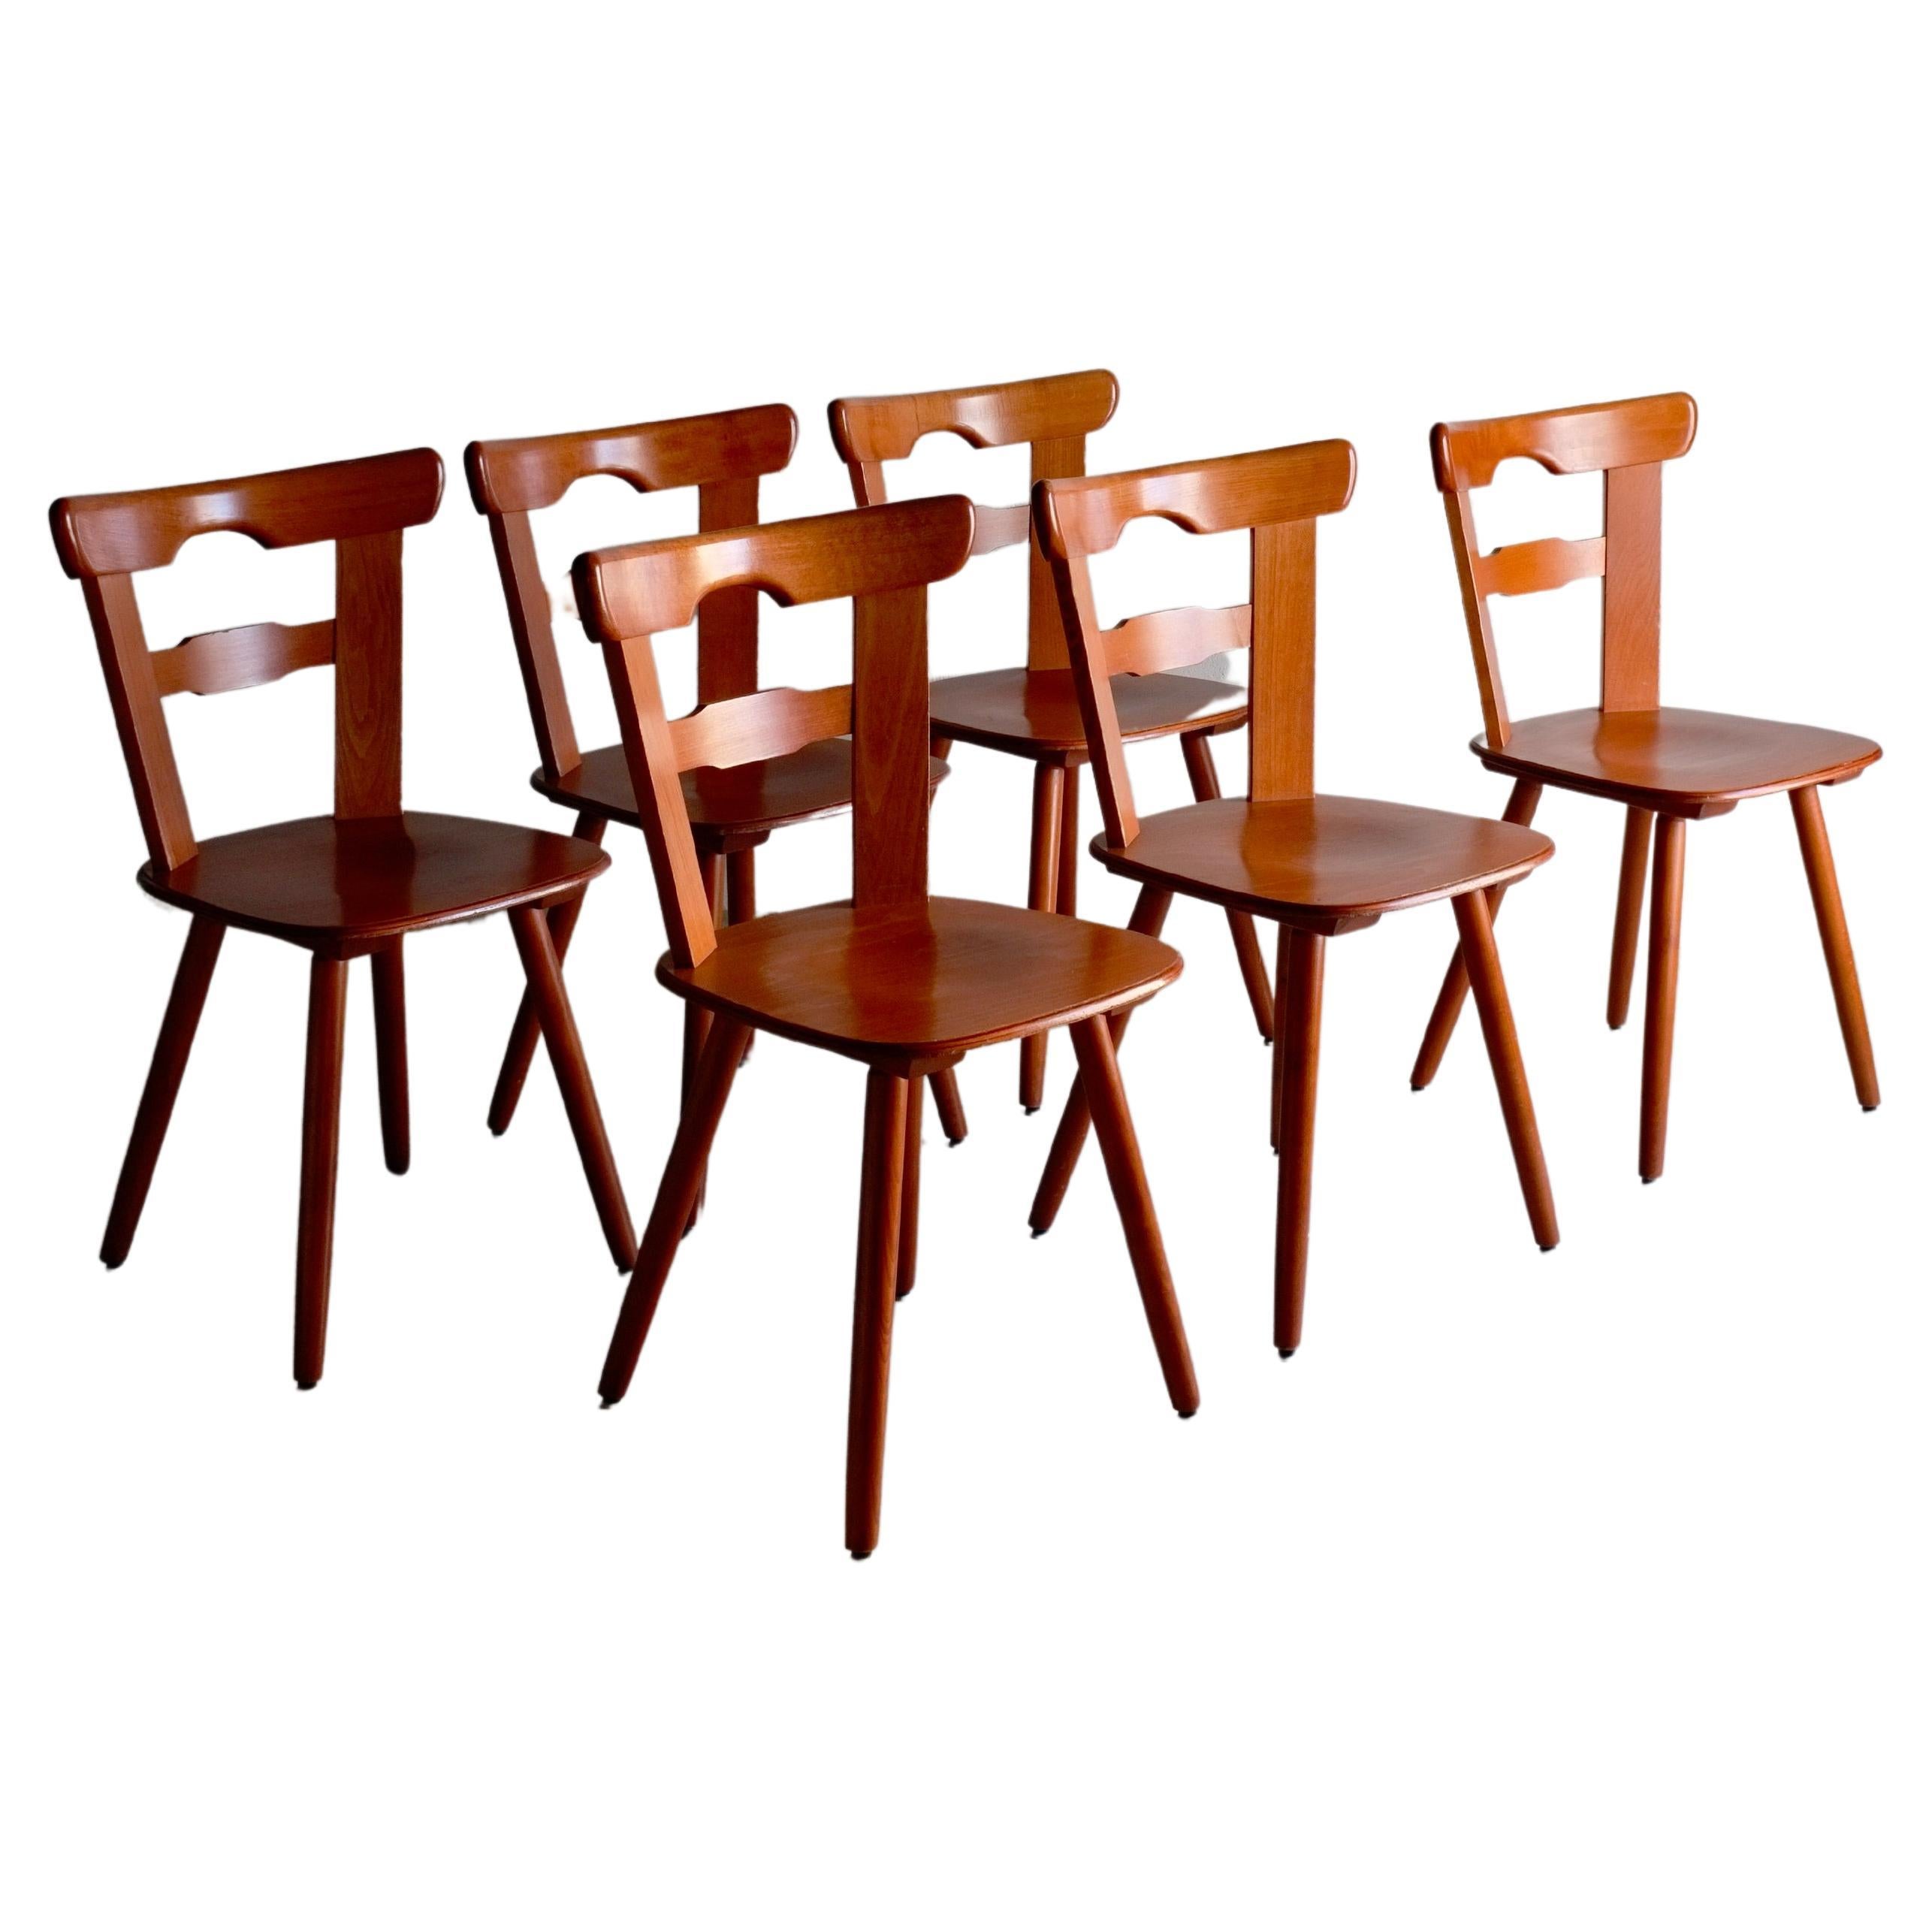 6 Carved Wood Dining Chairs, Netherlands, 1970s For Sale